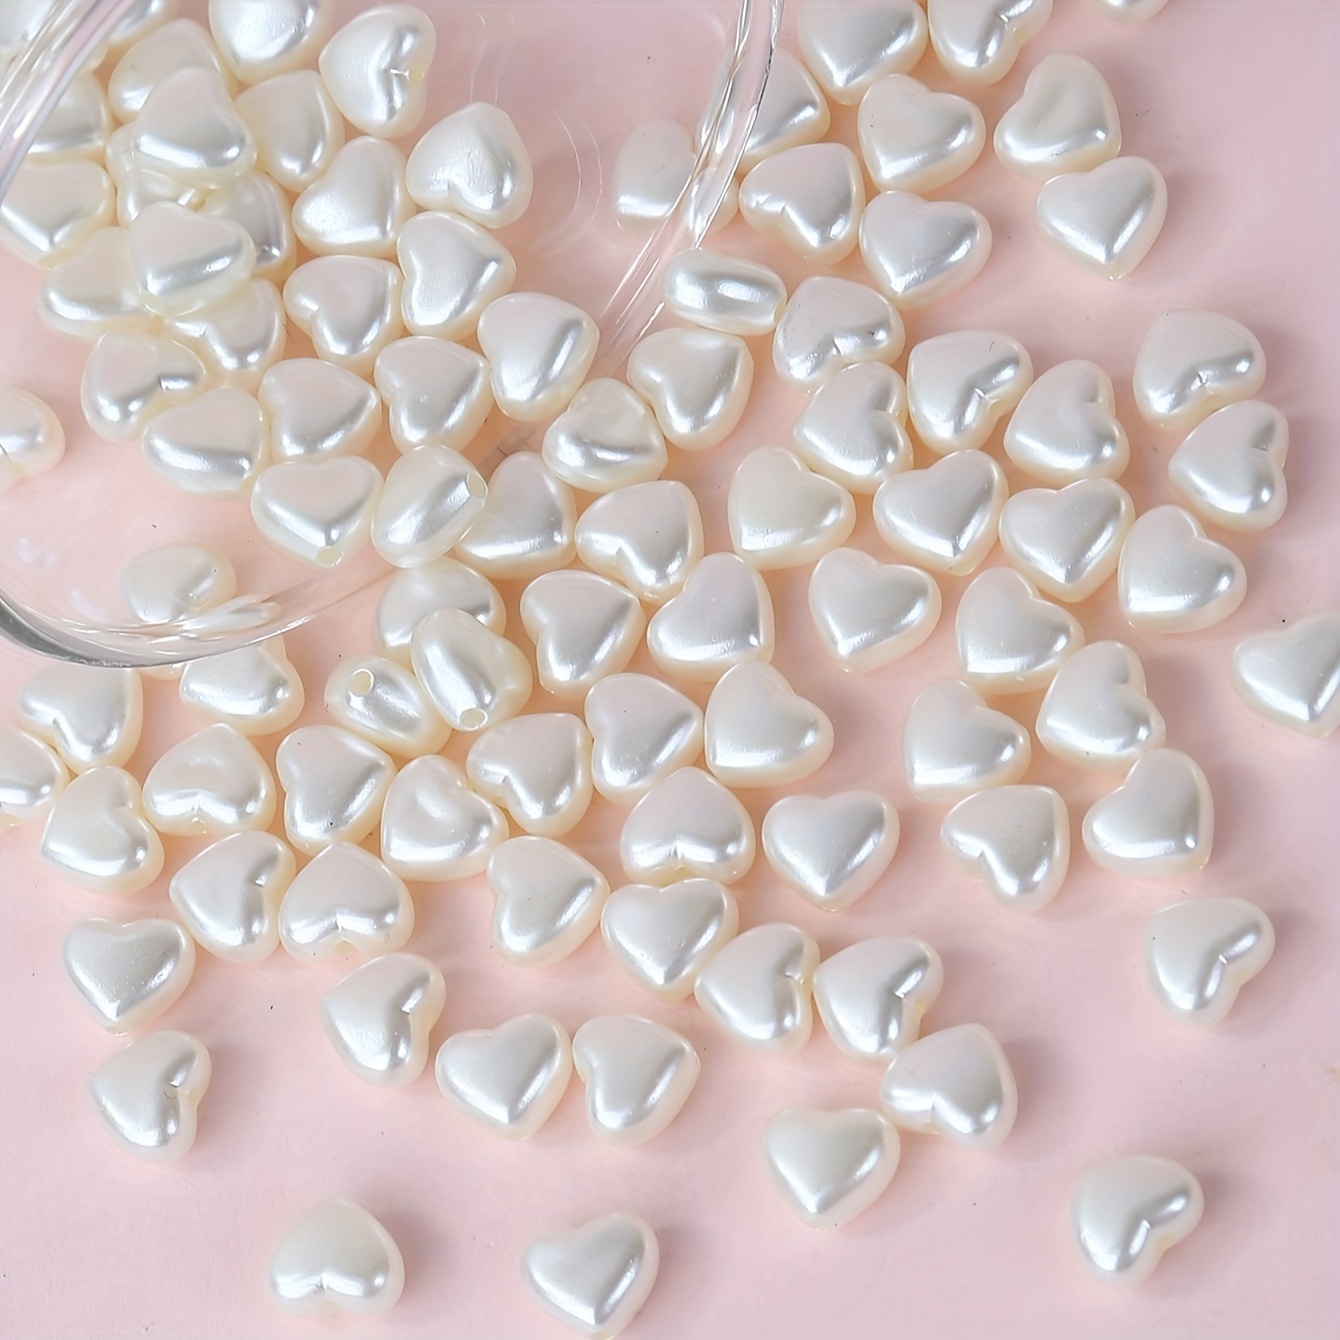 

300pcs Acrylic Heart Shaped Imitation Pearls Loose Spacer Beads For Jewelry Making Diy Elegant Necklace Bracelet Phone Bag Chain Small Business Supplies (10x10.5mm)